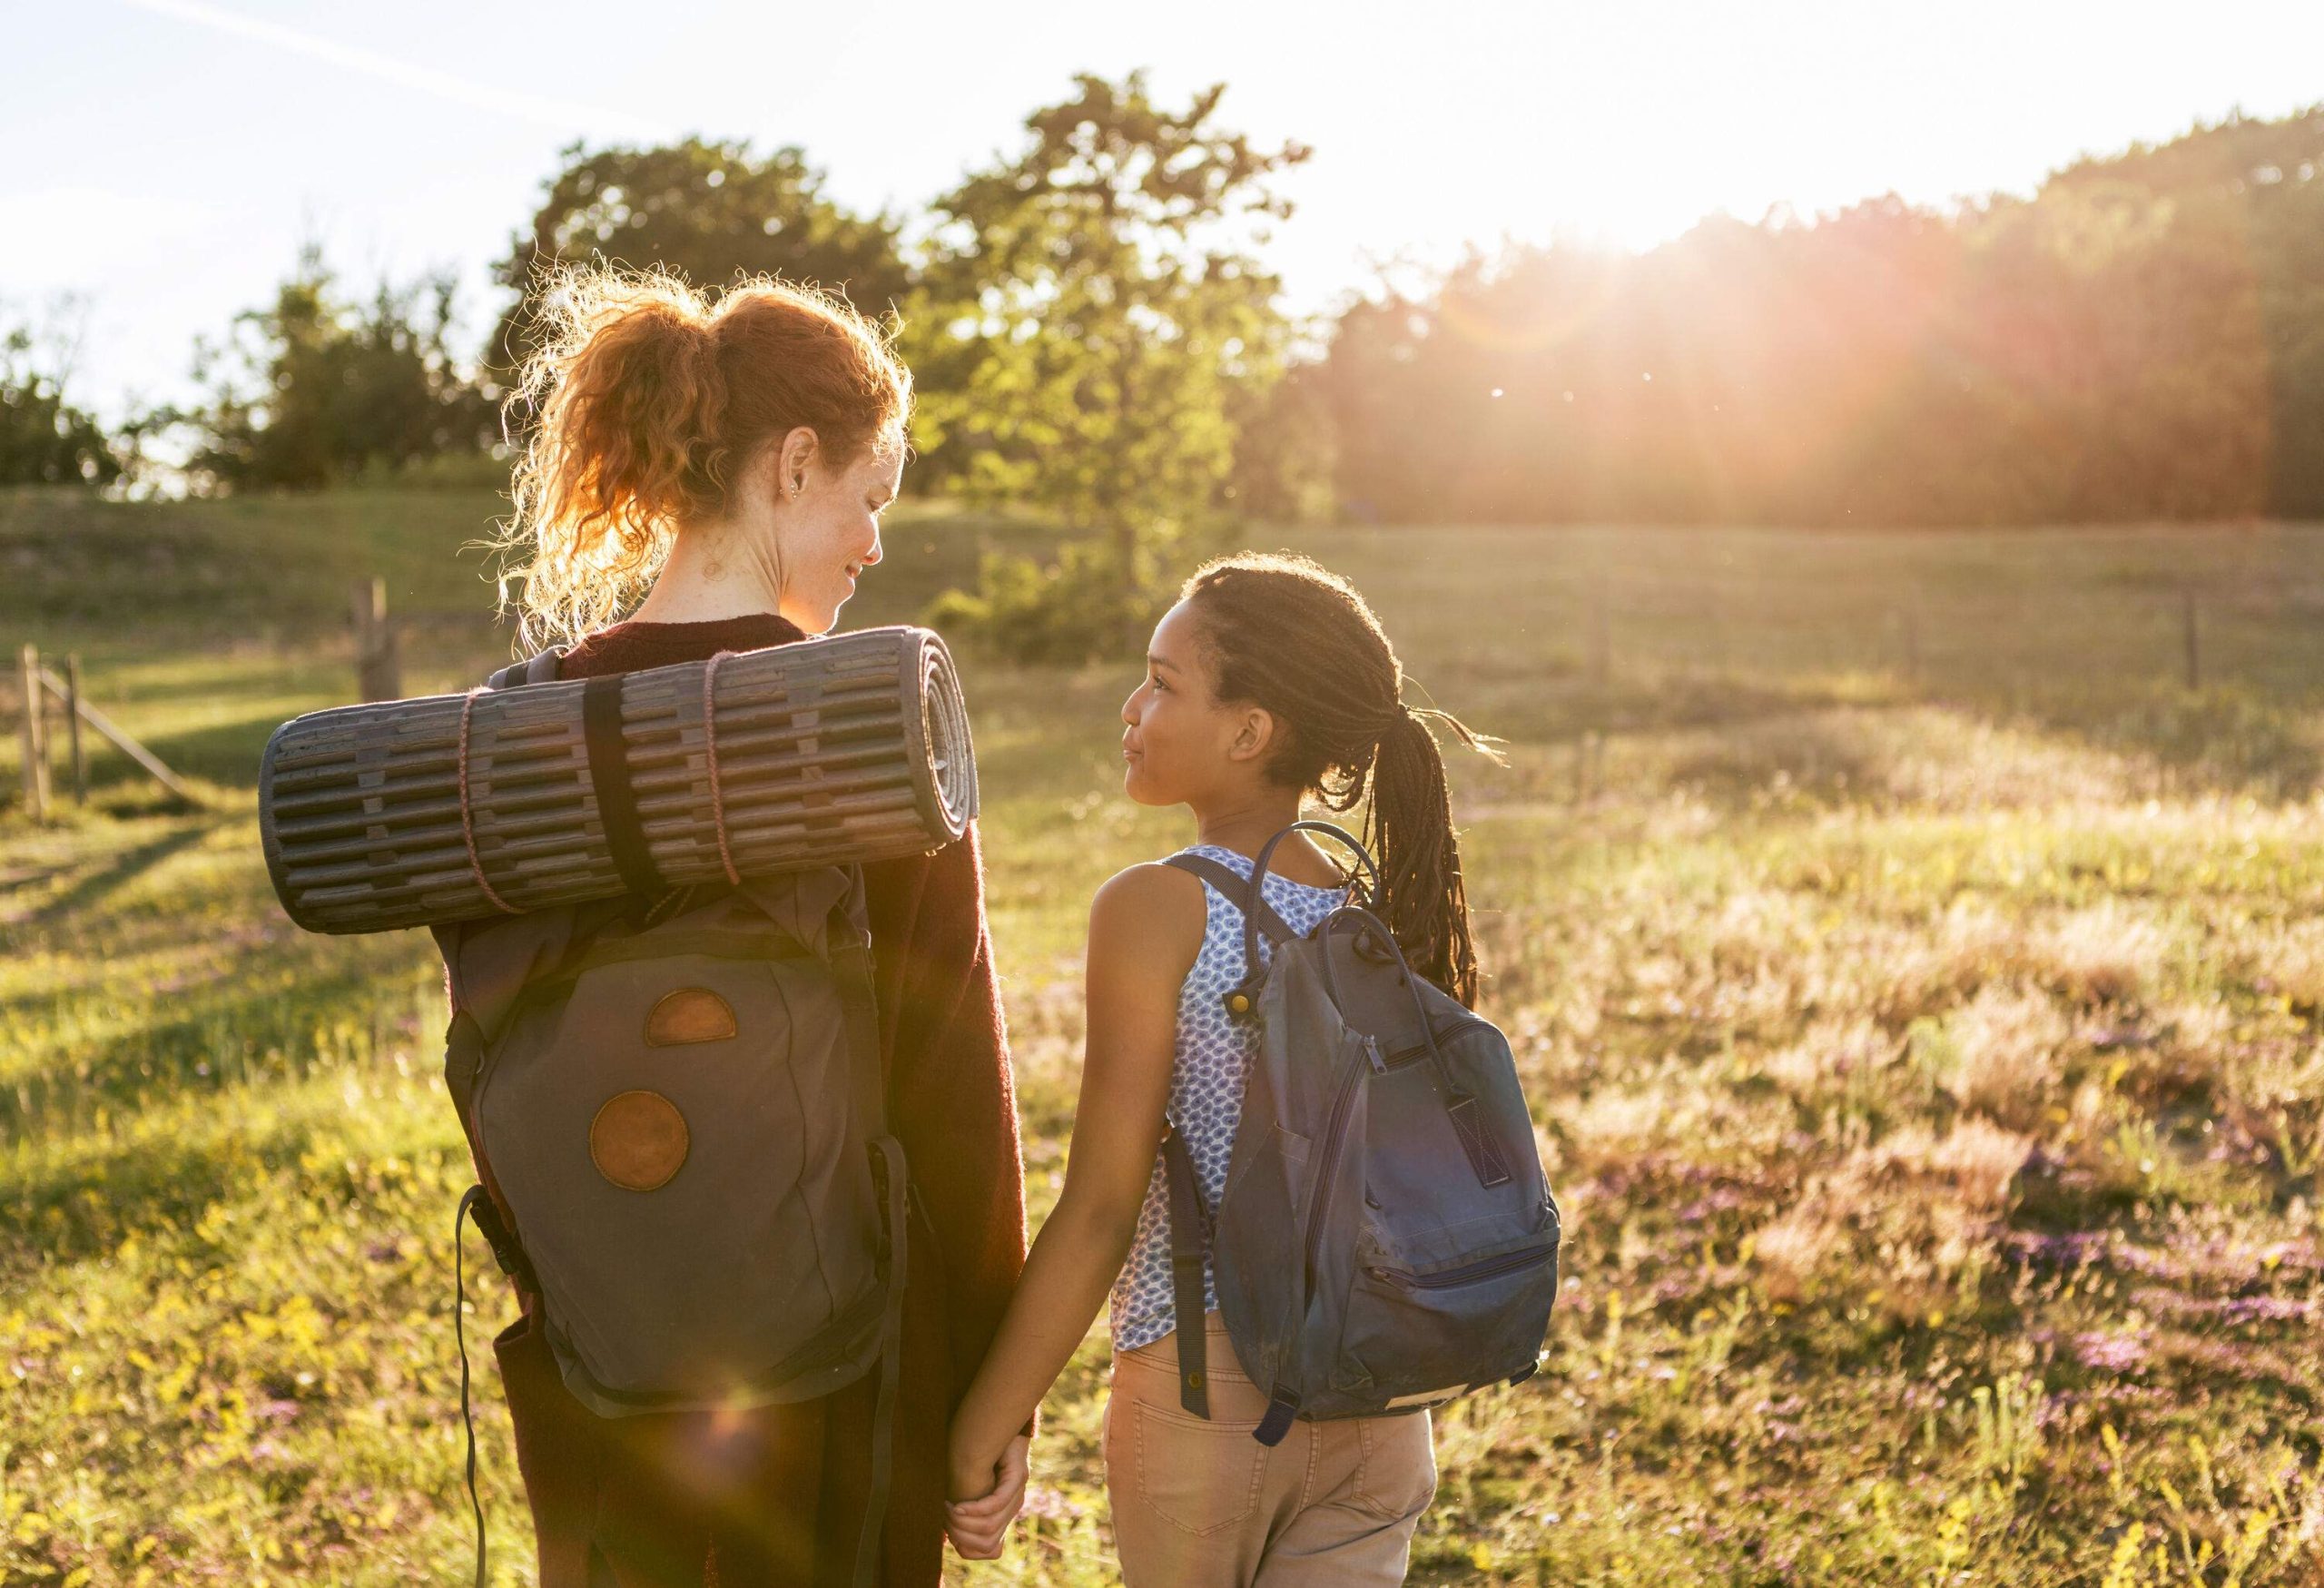 A woman and a young girl with backpacks walking across a grassland with the sun shining over the trees.